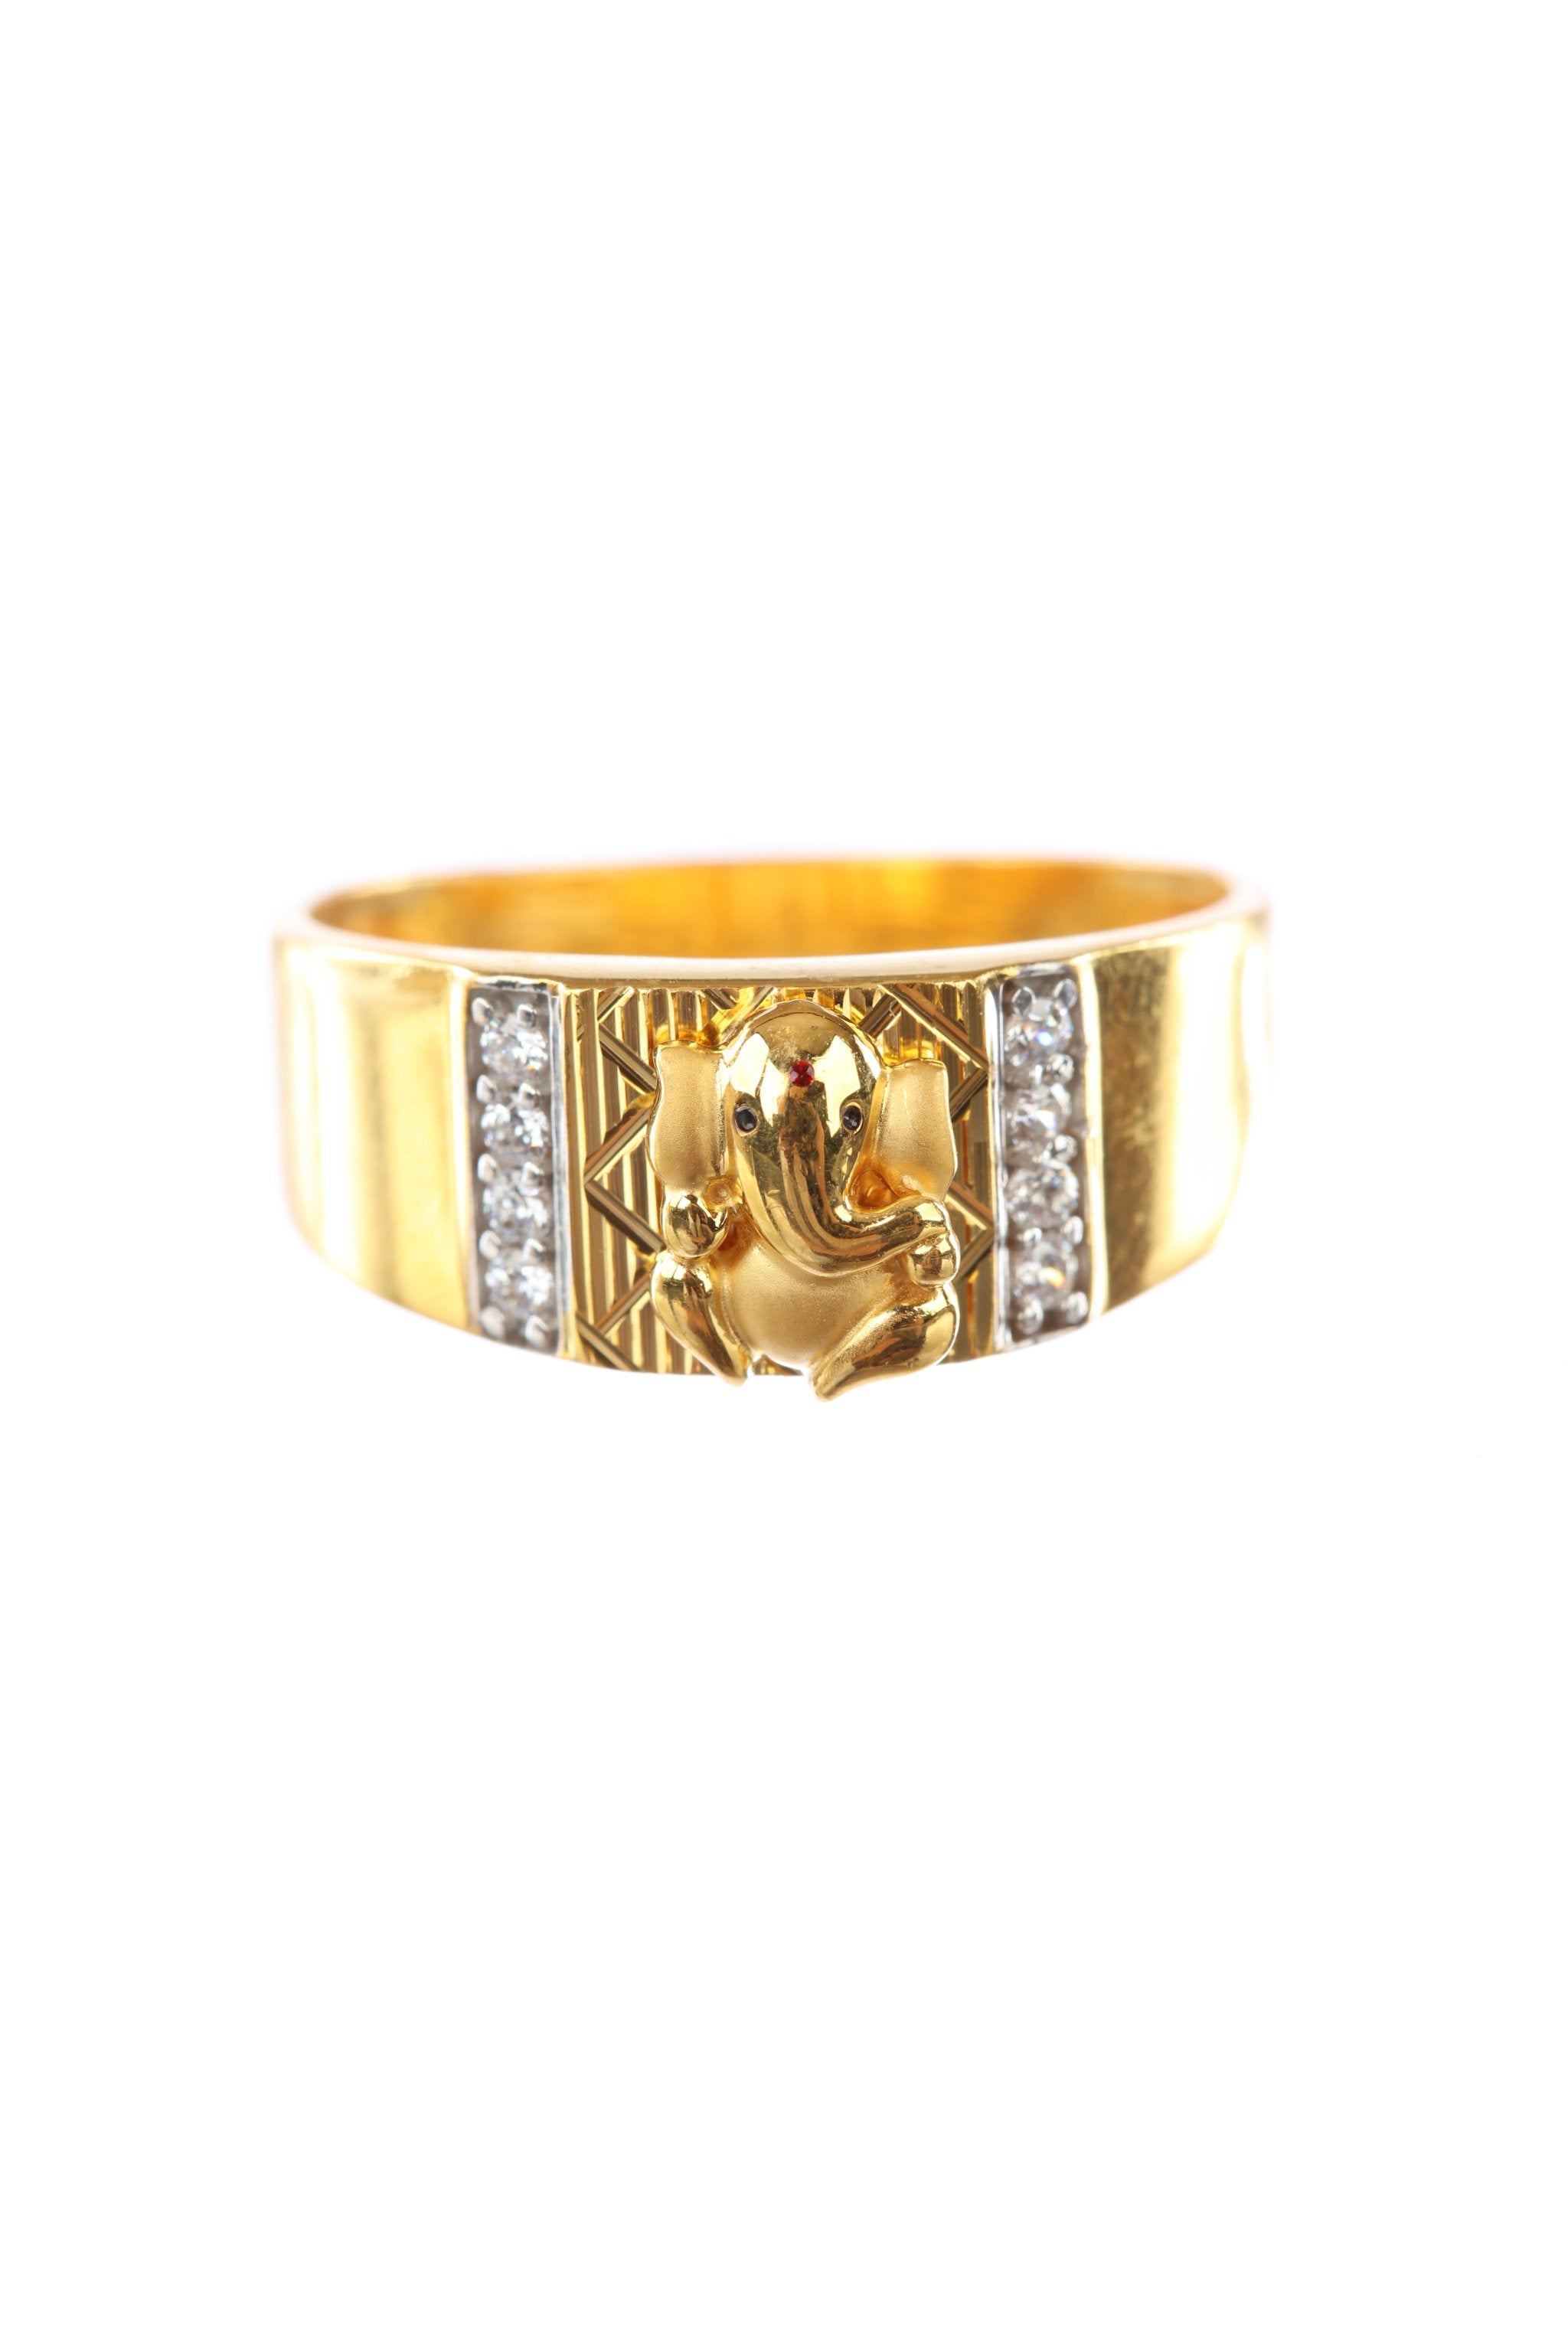 Buy Ganesh Gold Ring Designs Online in India | Candere by Kalyan Jewellers